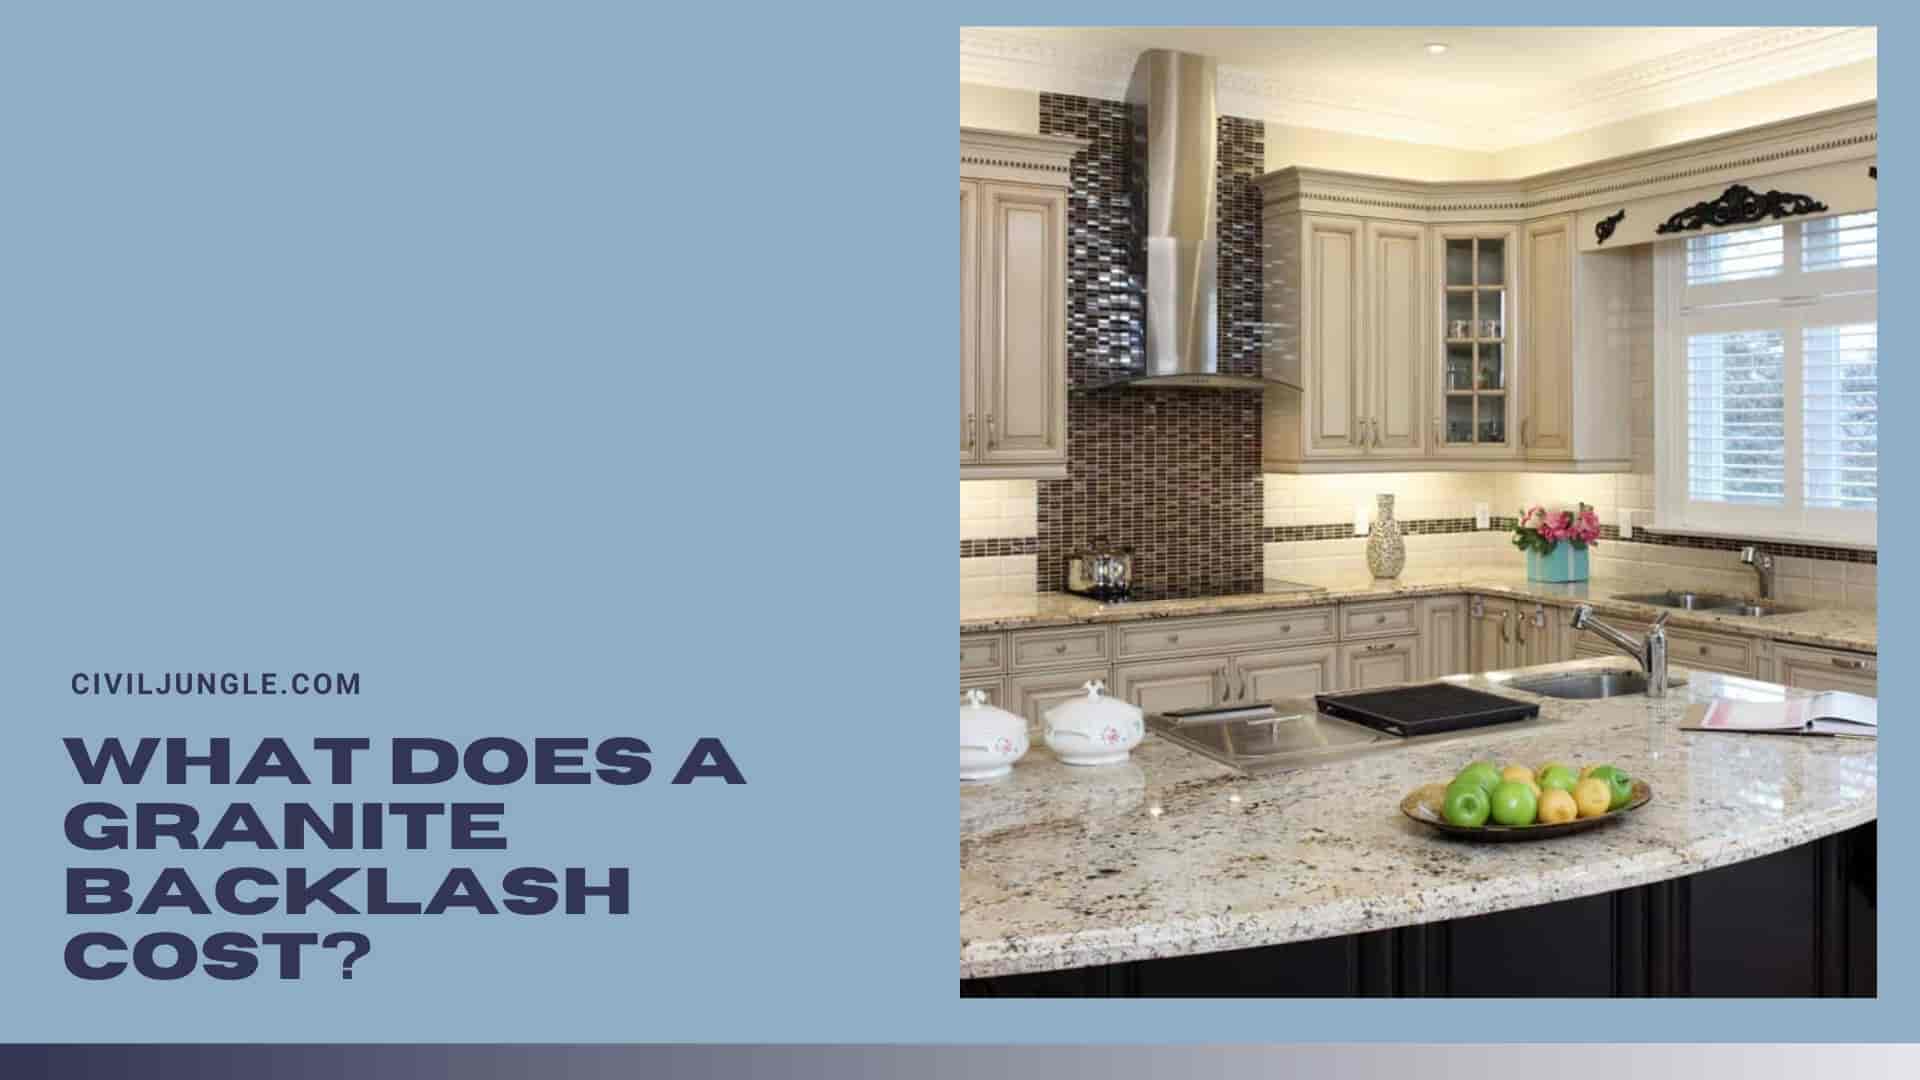 What Does a Granite Backlash Cost?